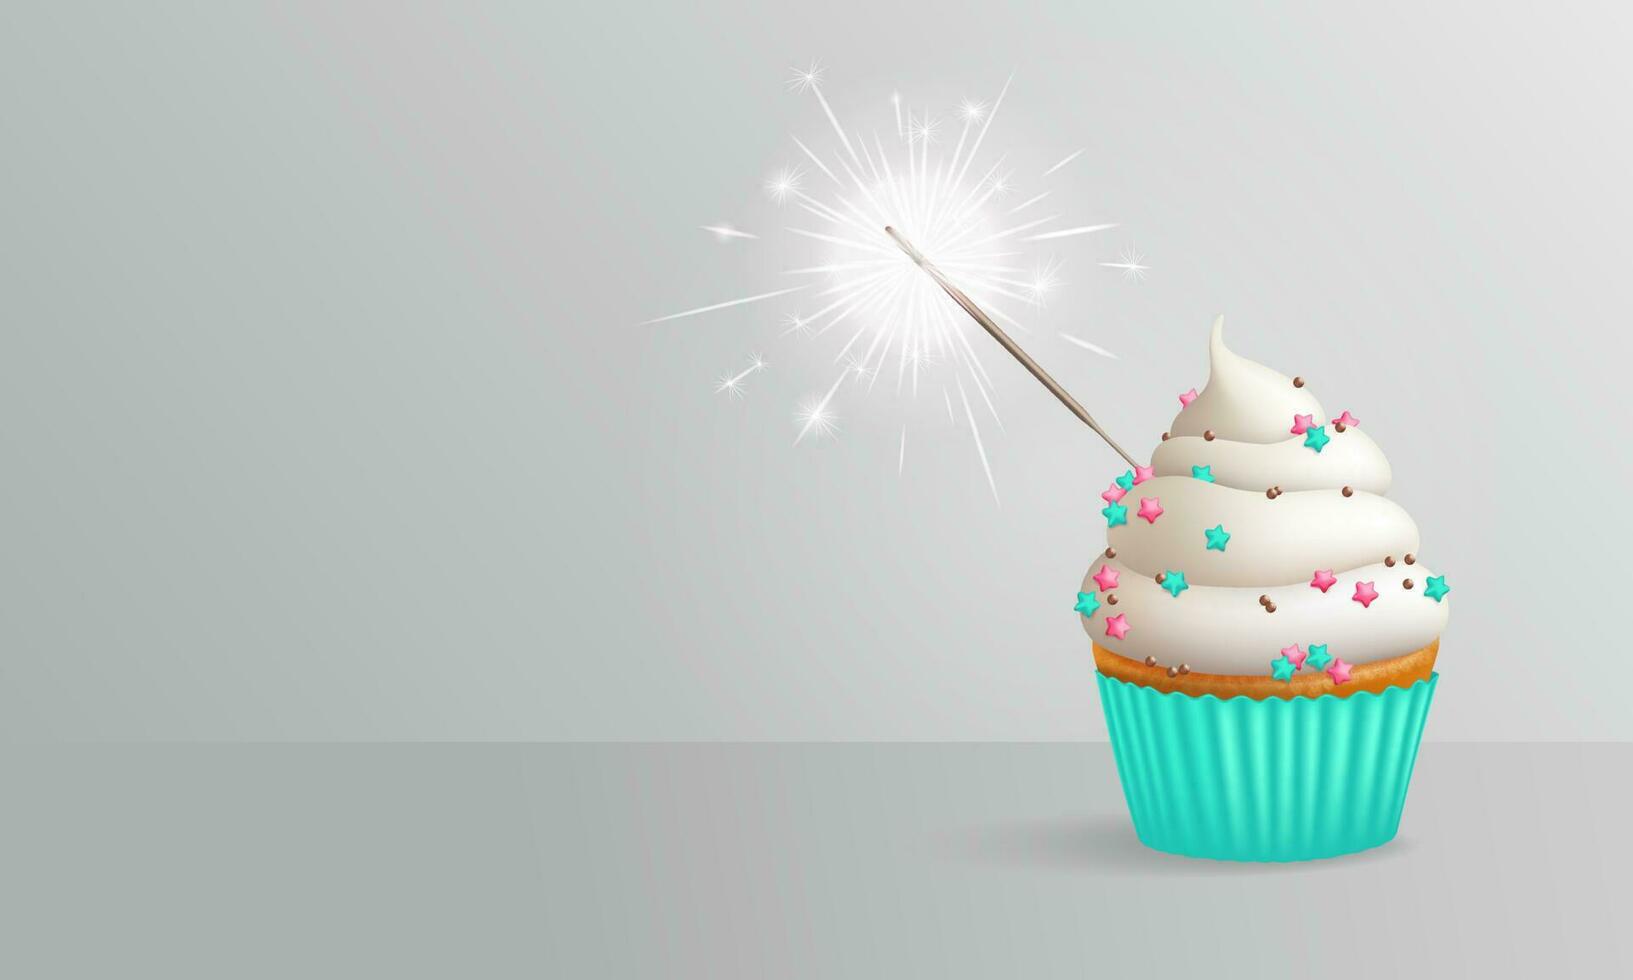 Realistic birthday cupcake with sprinkles and sparkler on background with copy space on the side. 3d vector illustration